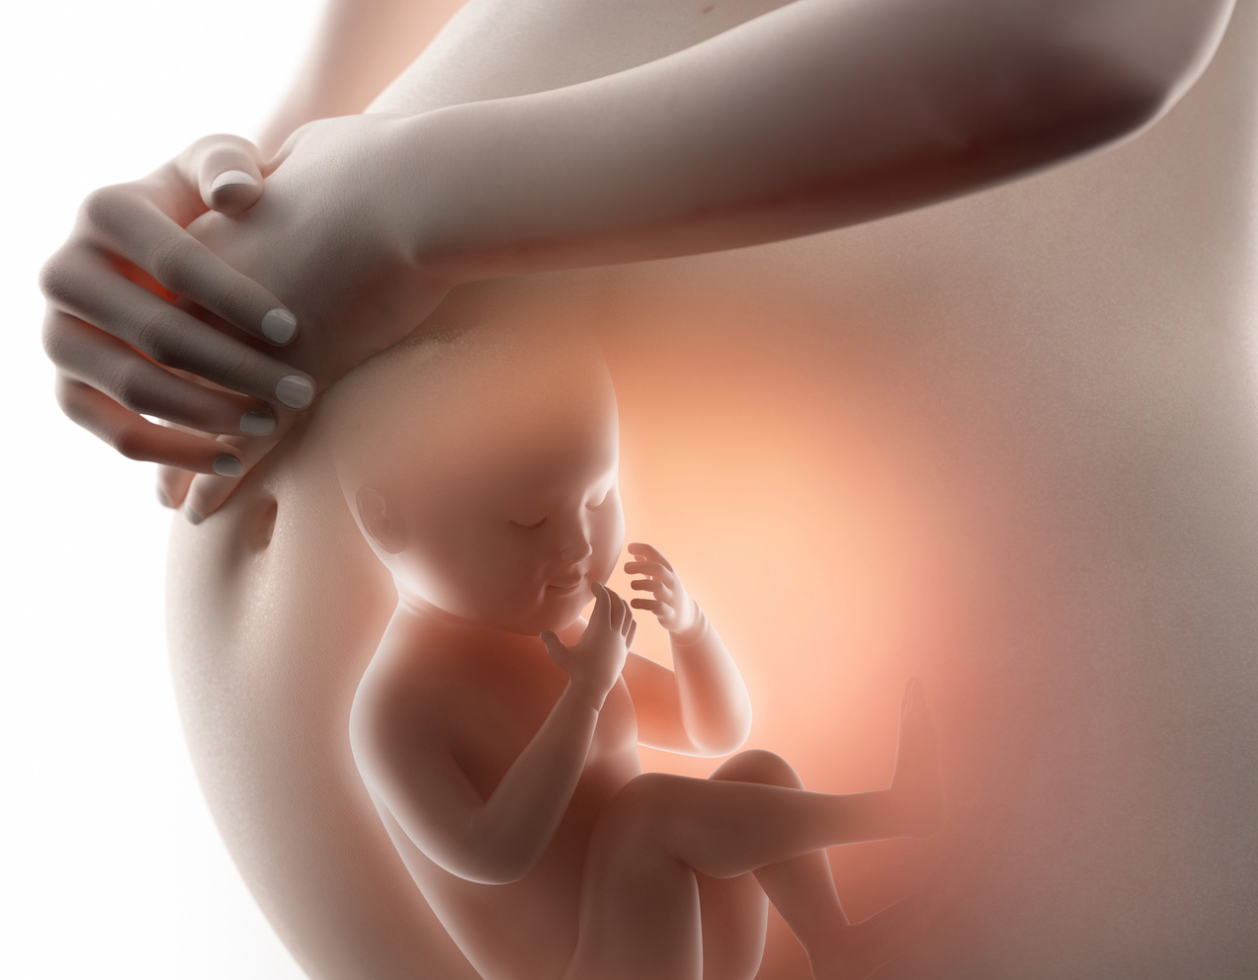 COVID-19 Vaccination Has No Impact on Placental Health, Suggesting Safety for Pregnant Women